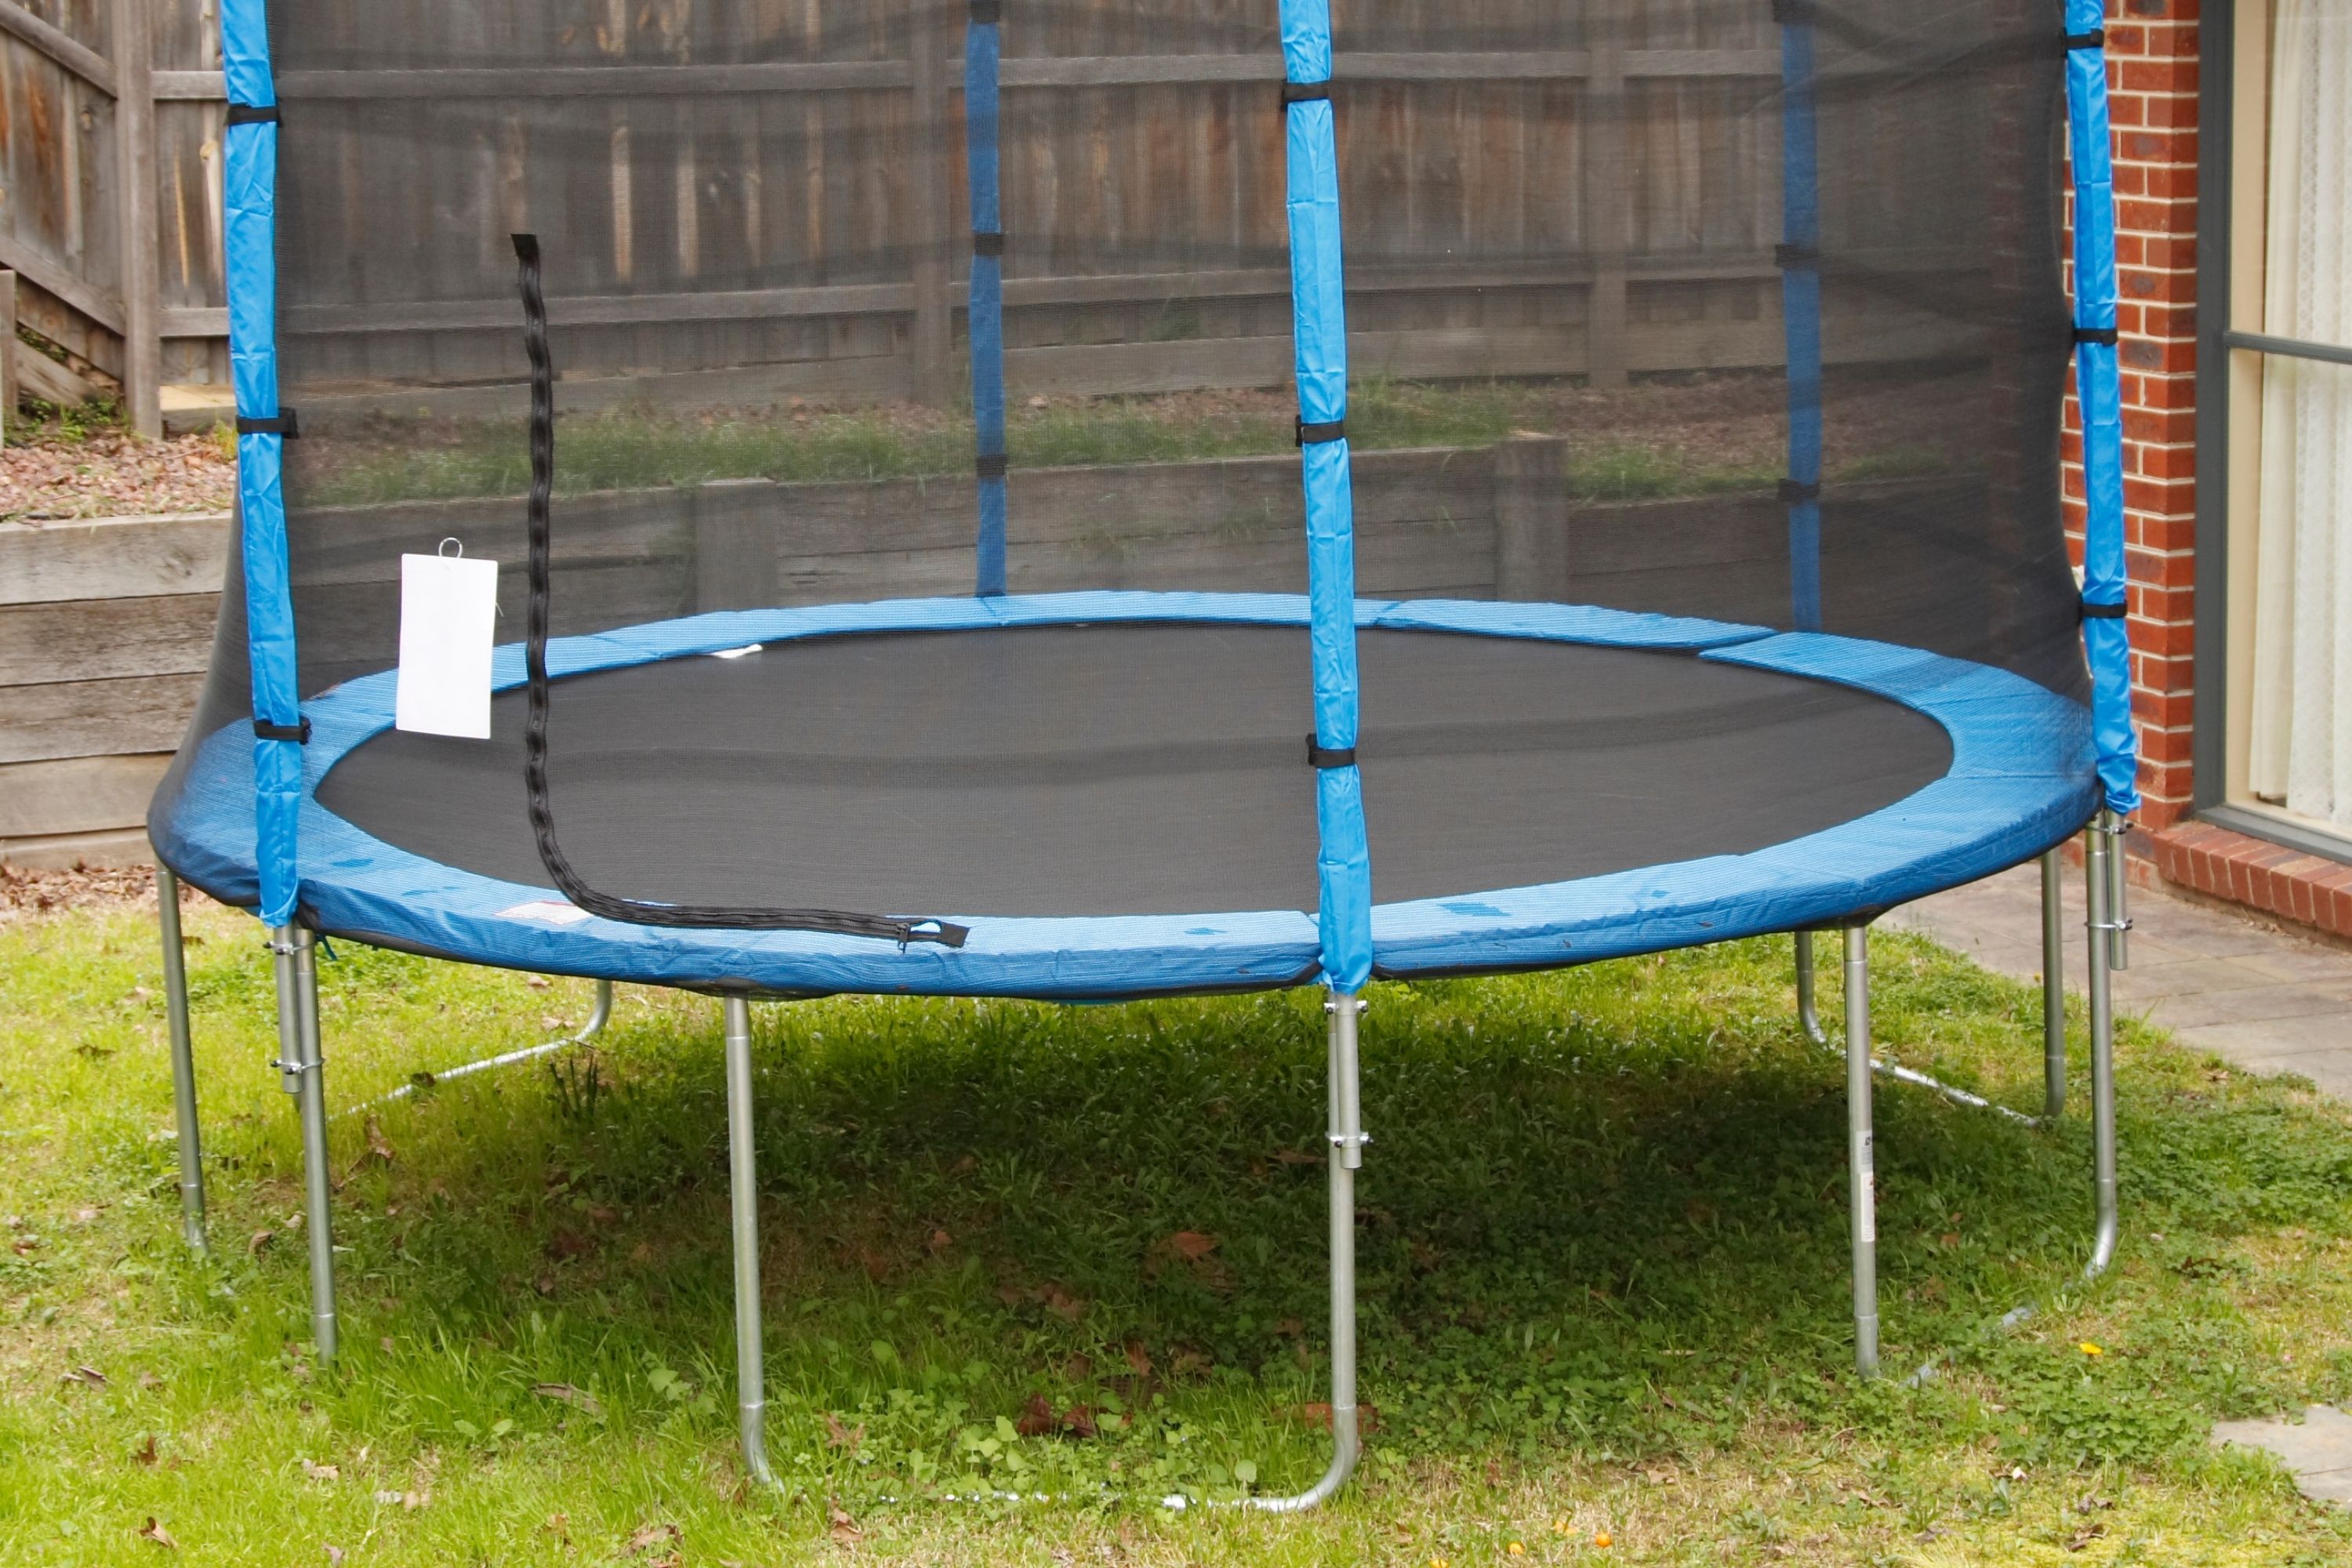 How to Winterize a Trampoline